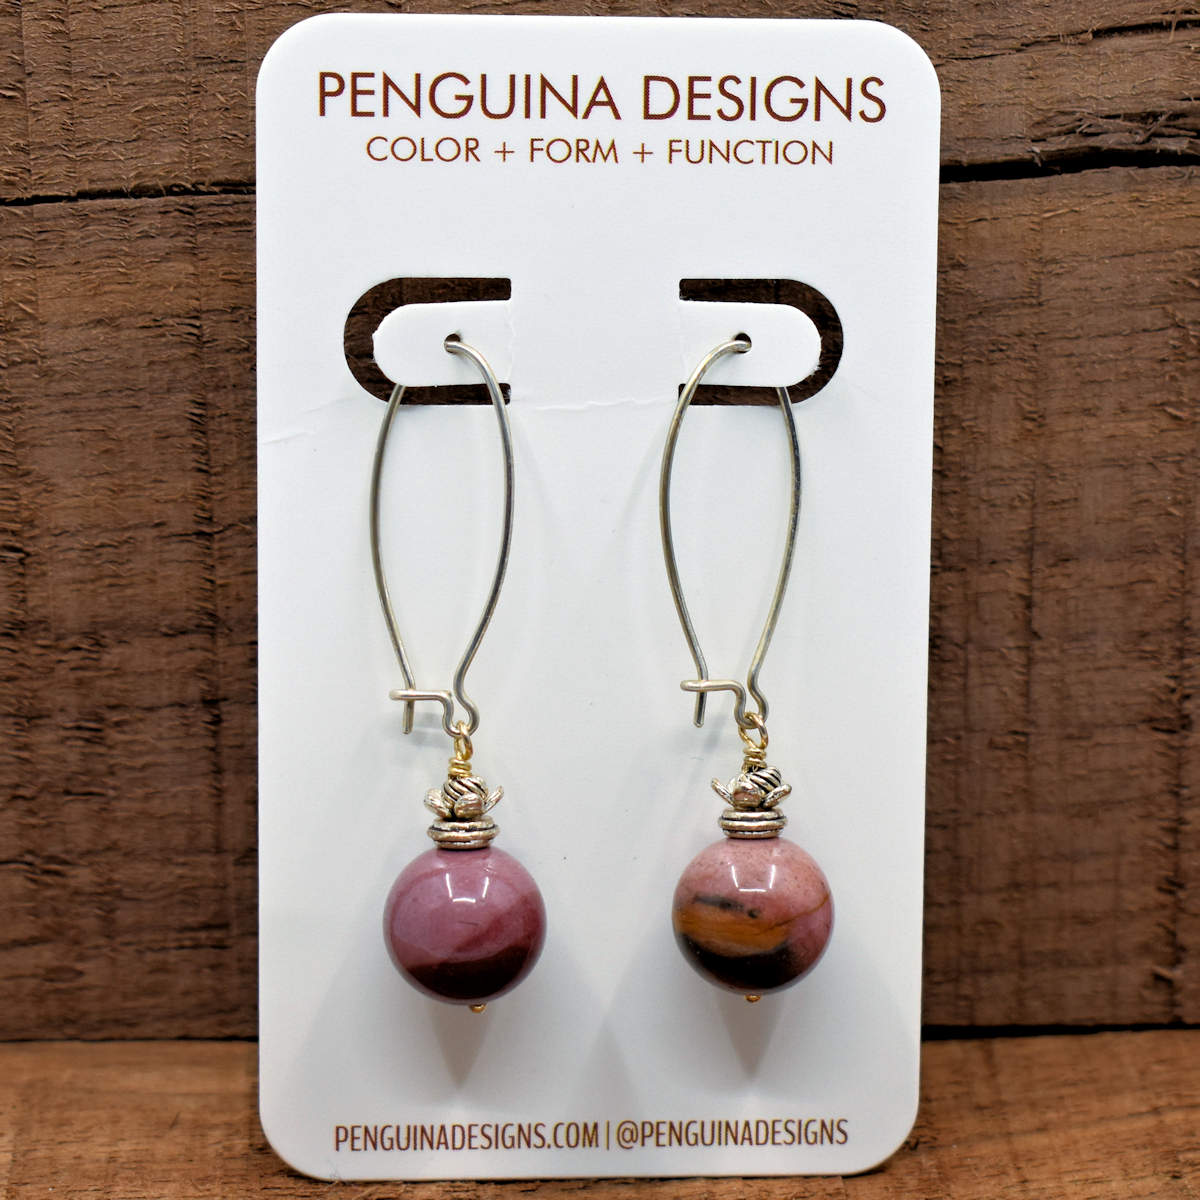 A pair of earrings on a white card rest against a wood background. The earrings have long silver oval wires that latch and dusty pink stone balls at the bottom that have landscape-like layers of darker color at the bottom.